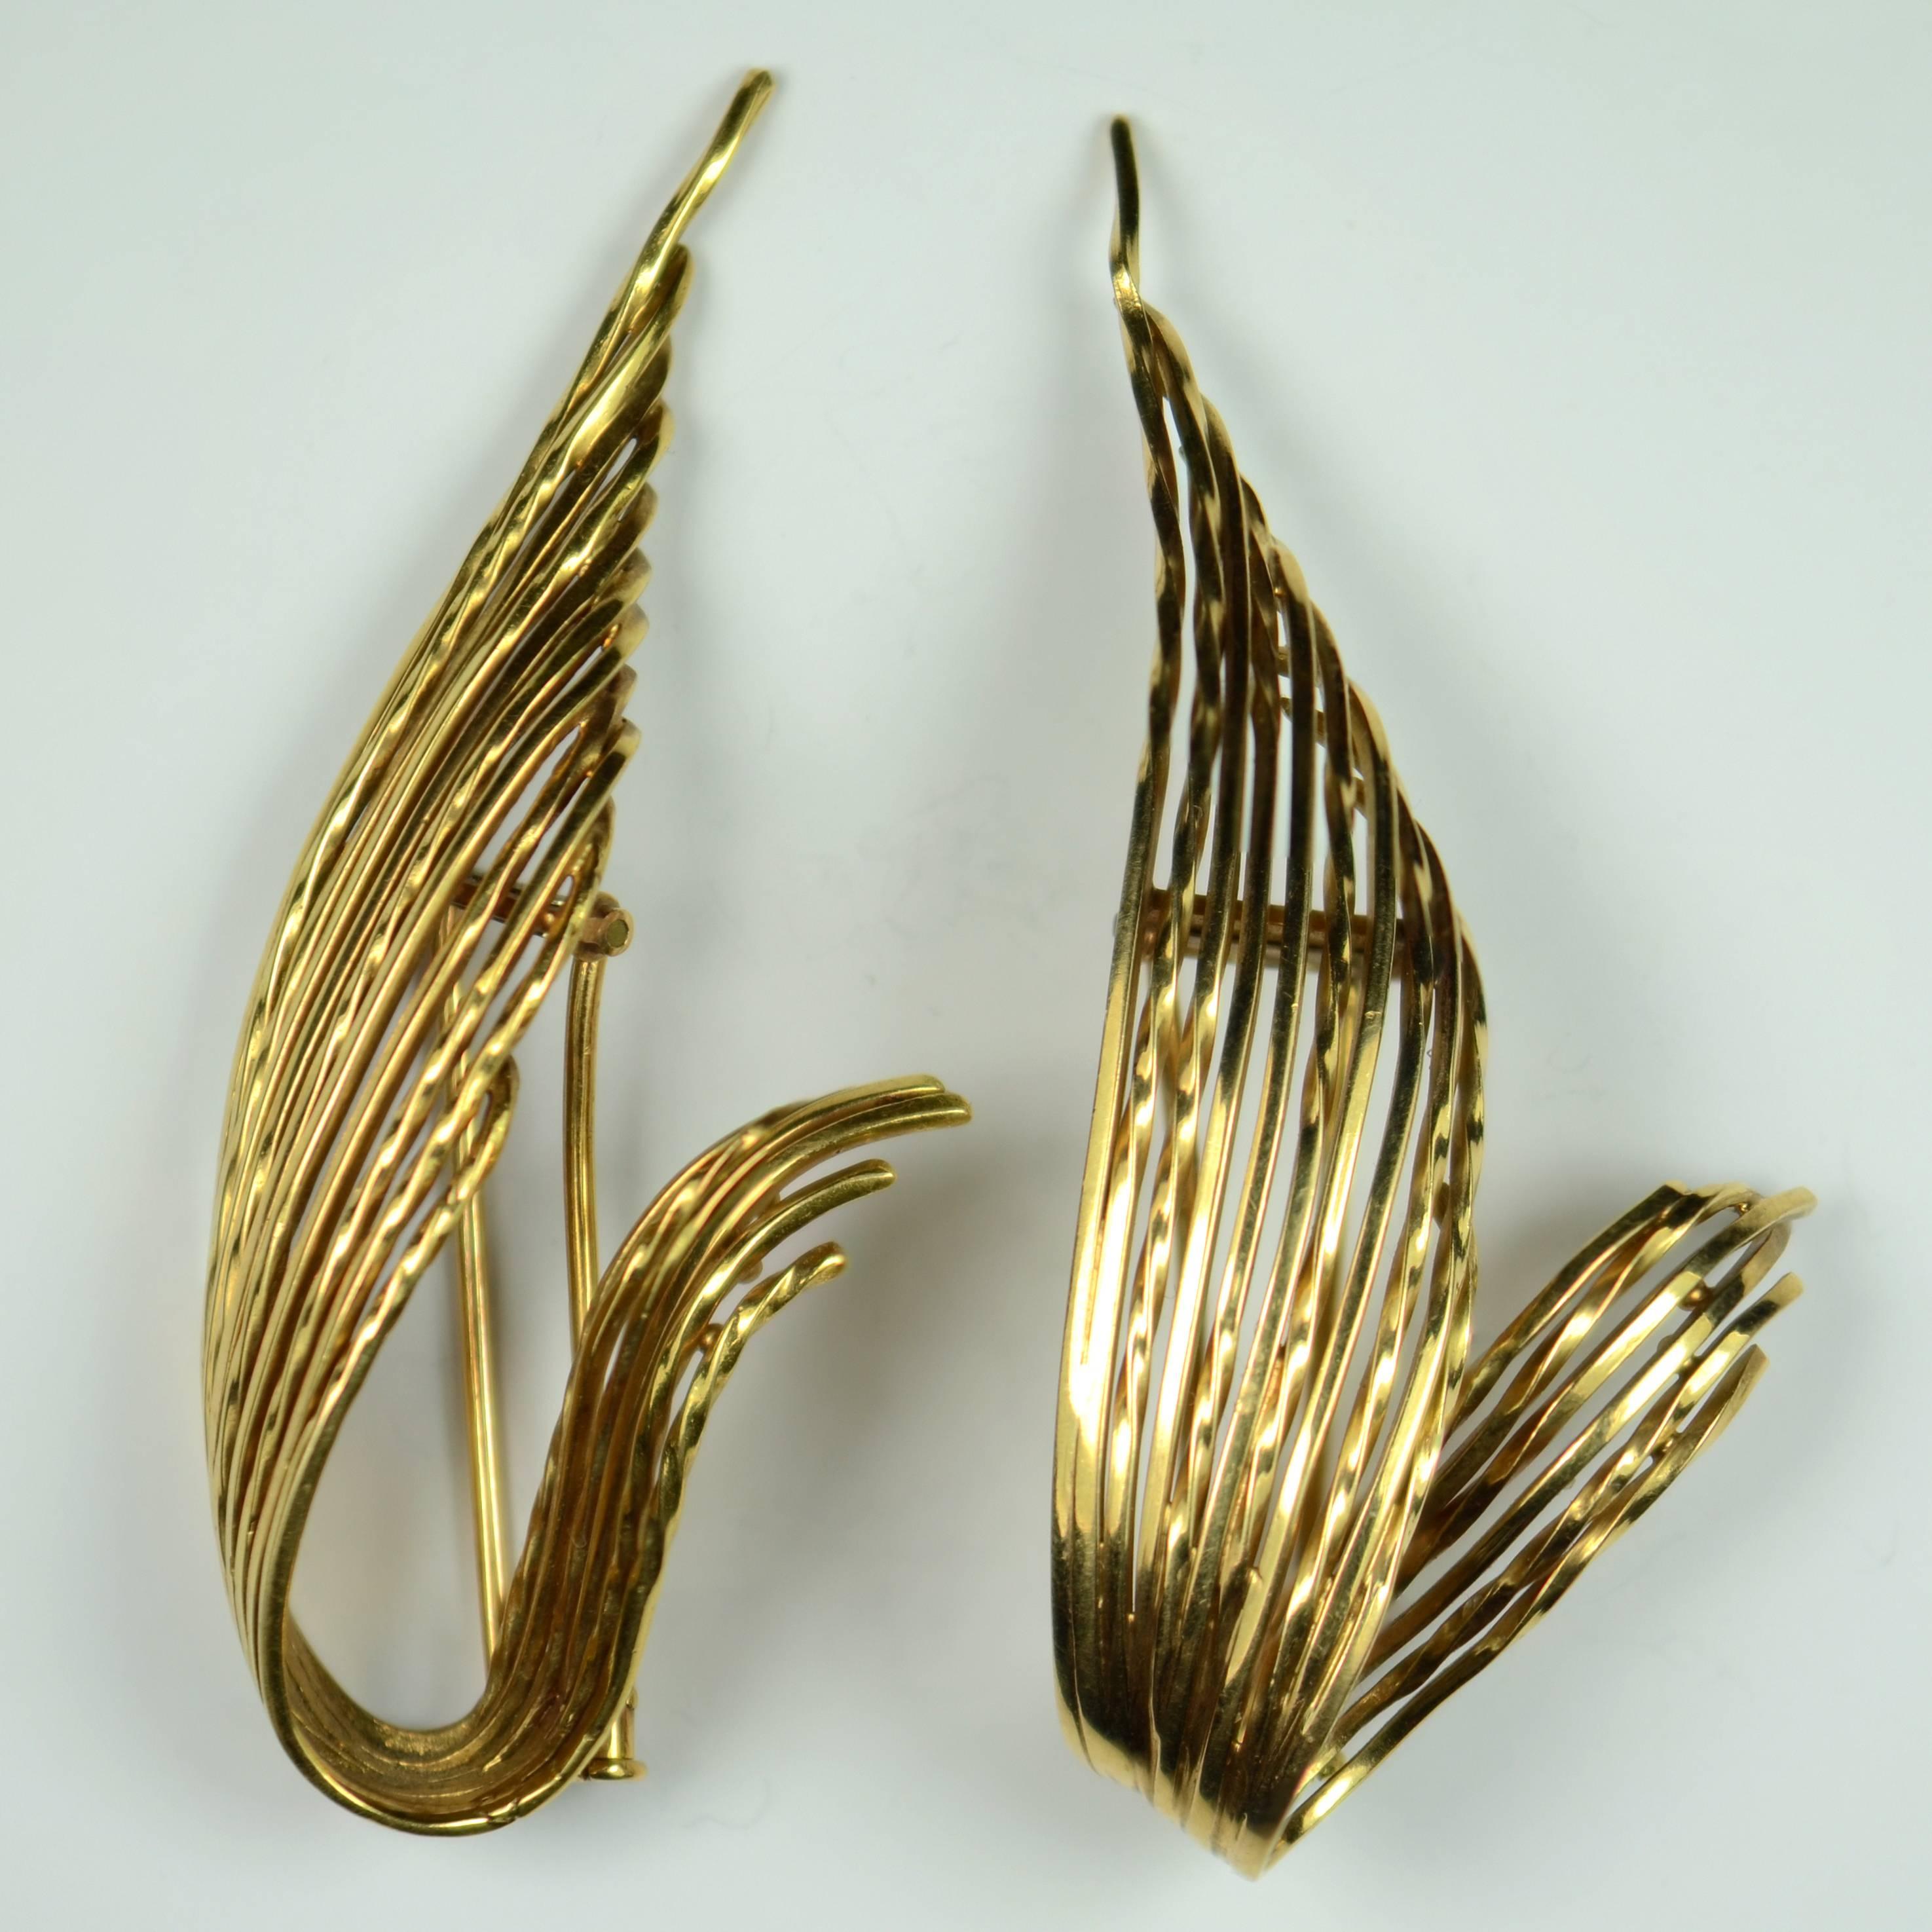 A pair of 18 carat gold clip brooches by Pierre Sterlé designed as a pair of abstracted feathers.  The rounded form of these brooches has a bold 3-dimensional feel with twisted wirework giving textural interest.

Both clips are stamped with the